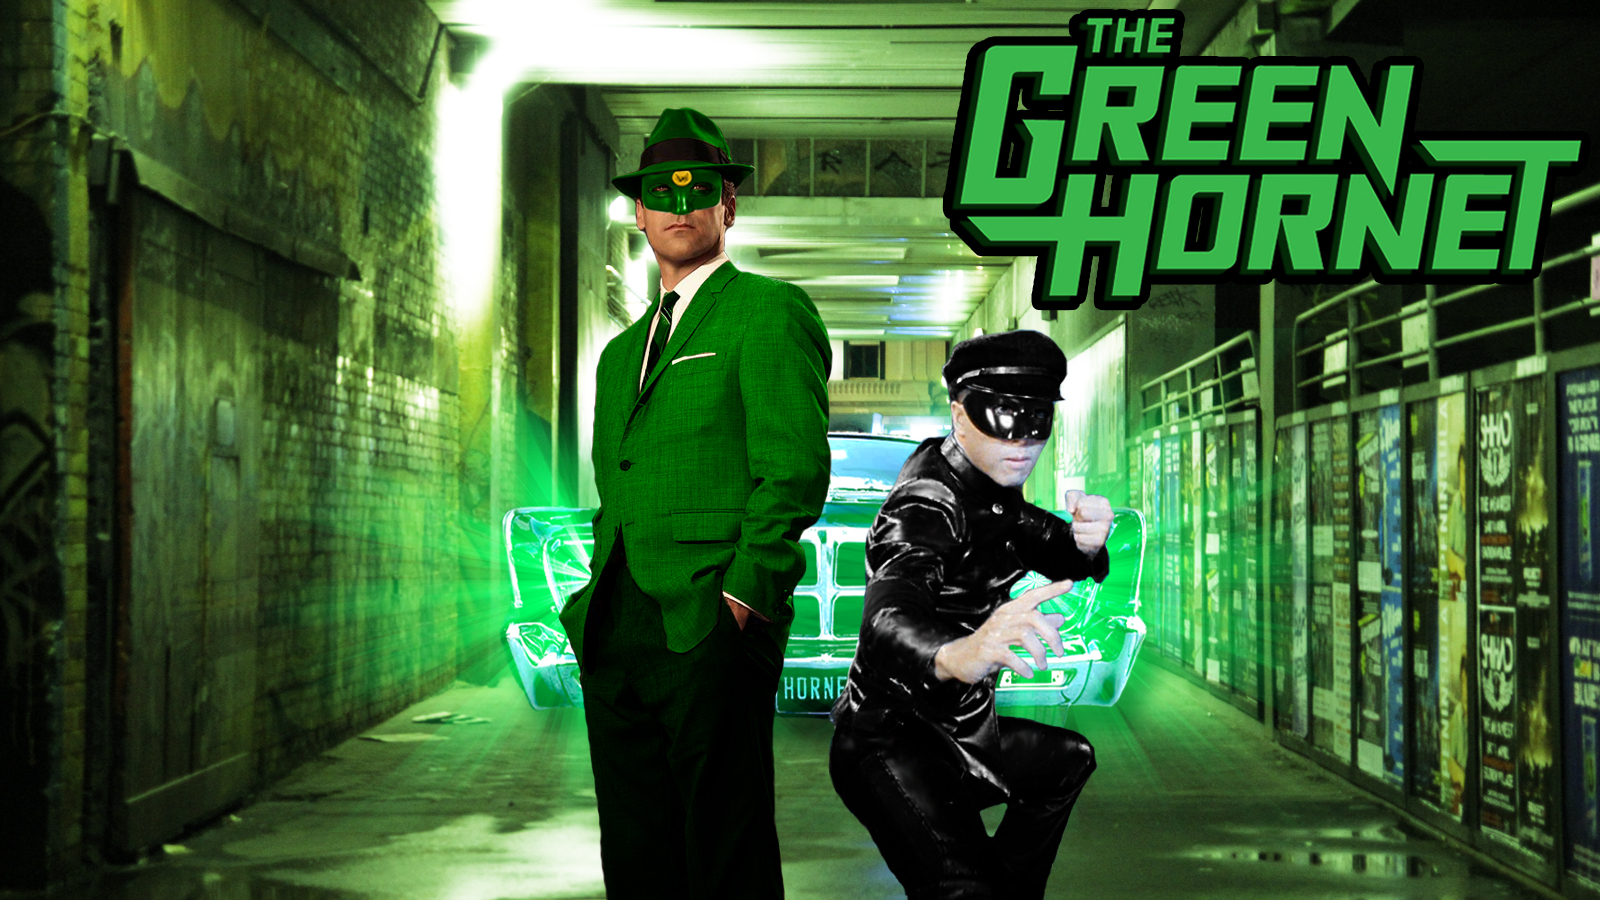 The Green Hor Wp By Swfan1977 Customization Wallpaper Photo